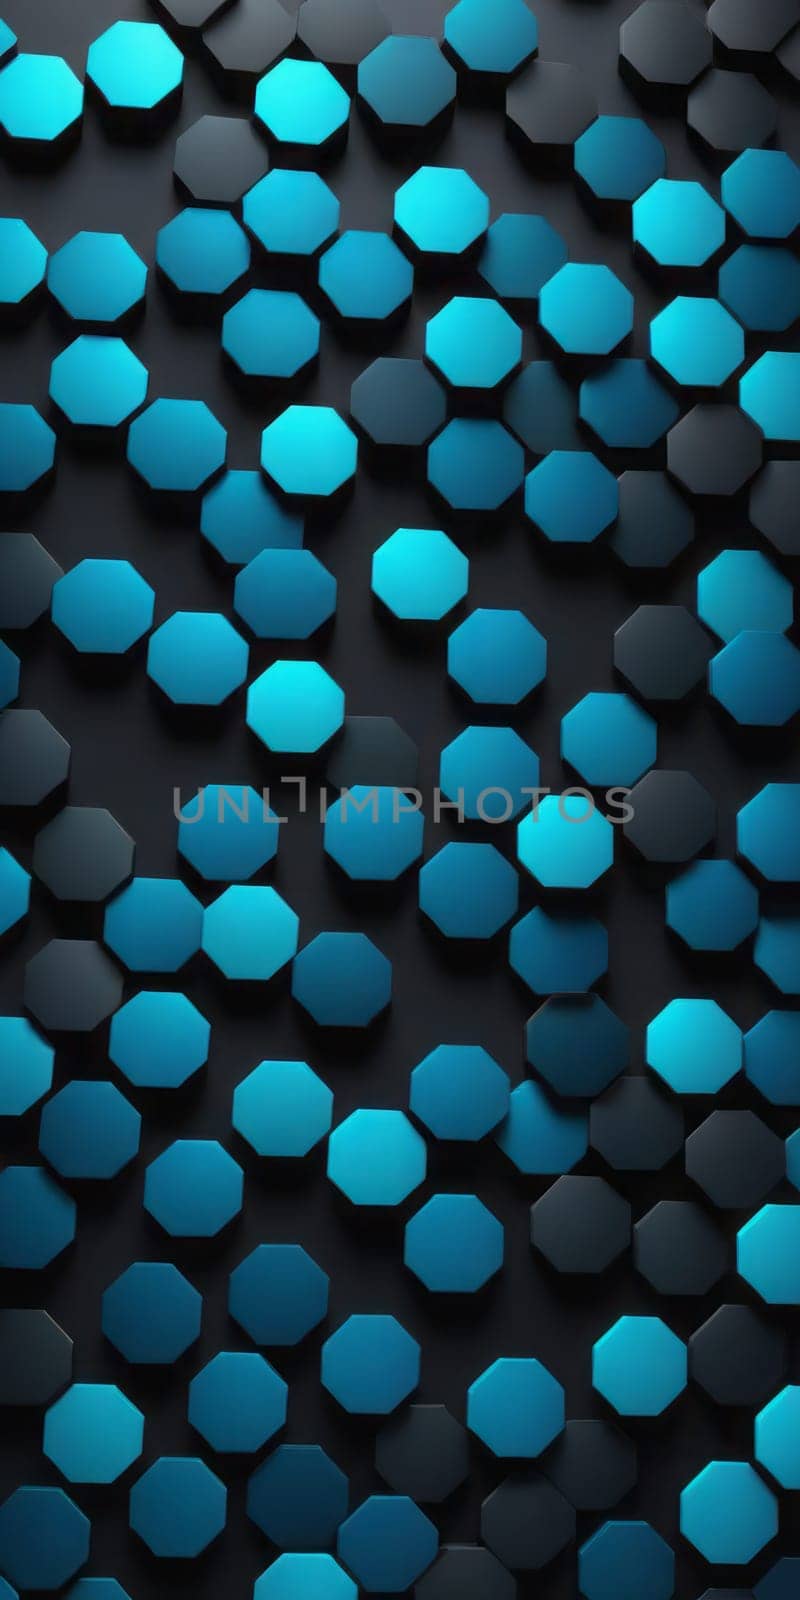 Octagonal Shapes in Black and Blue by nkotlyar